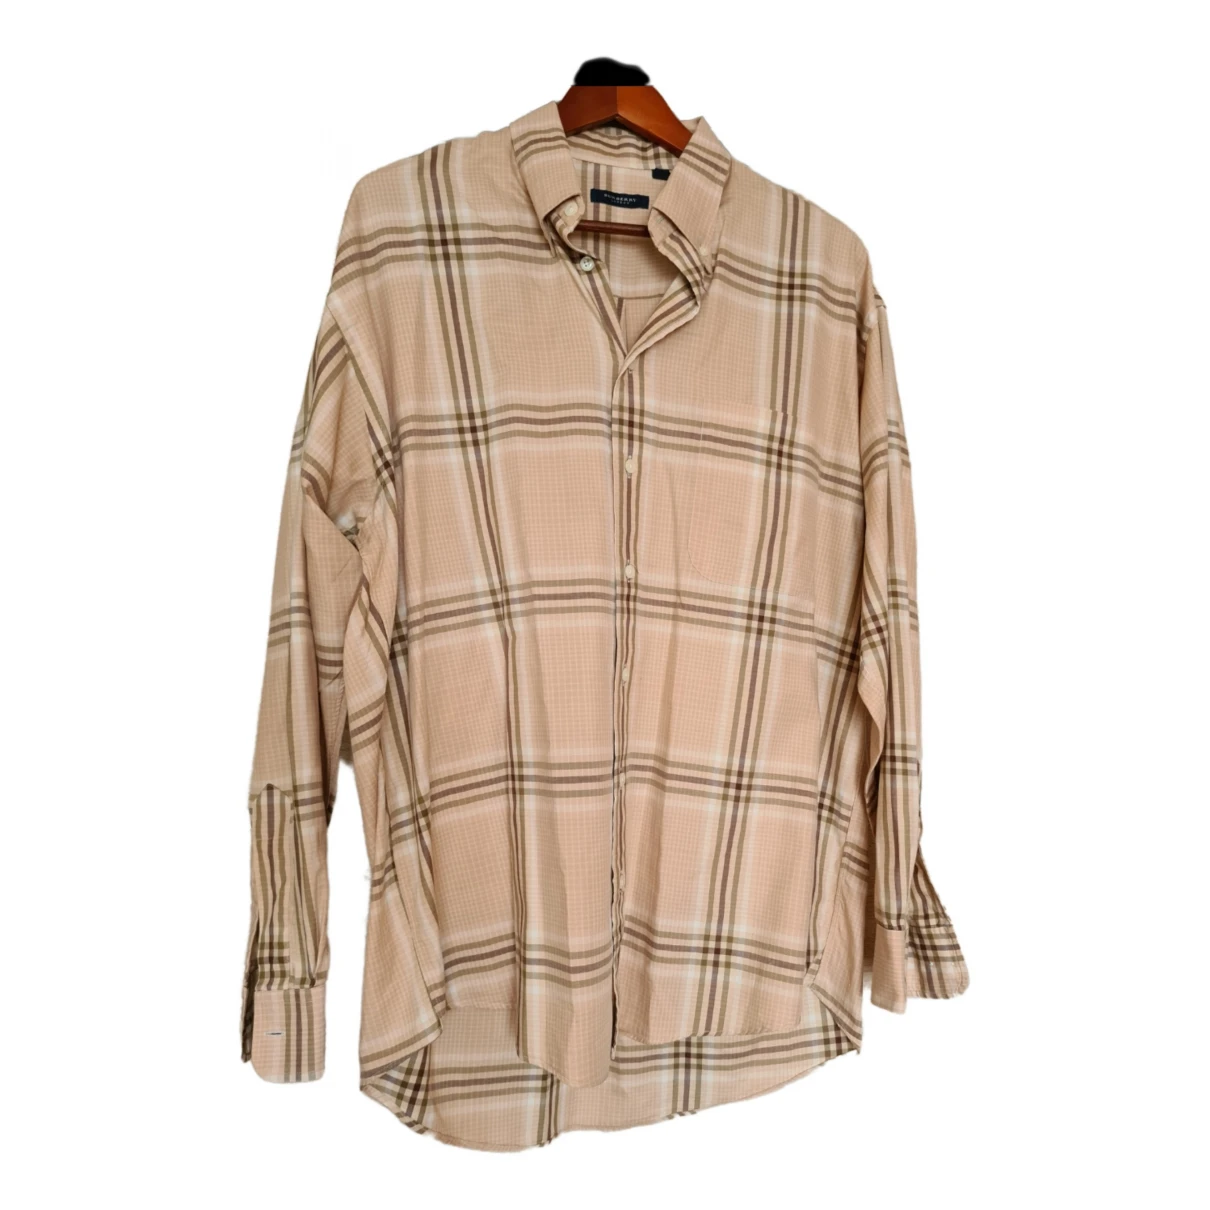 clothing Burberry shirts for Male Cotton XL International. Used condition